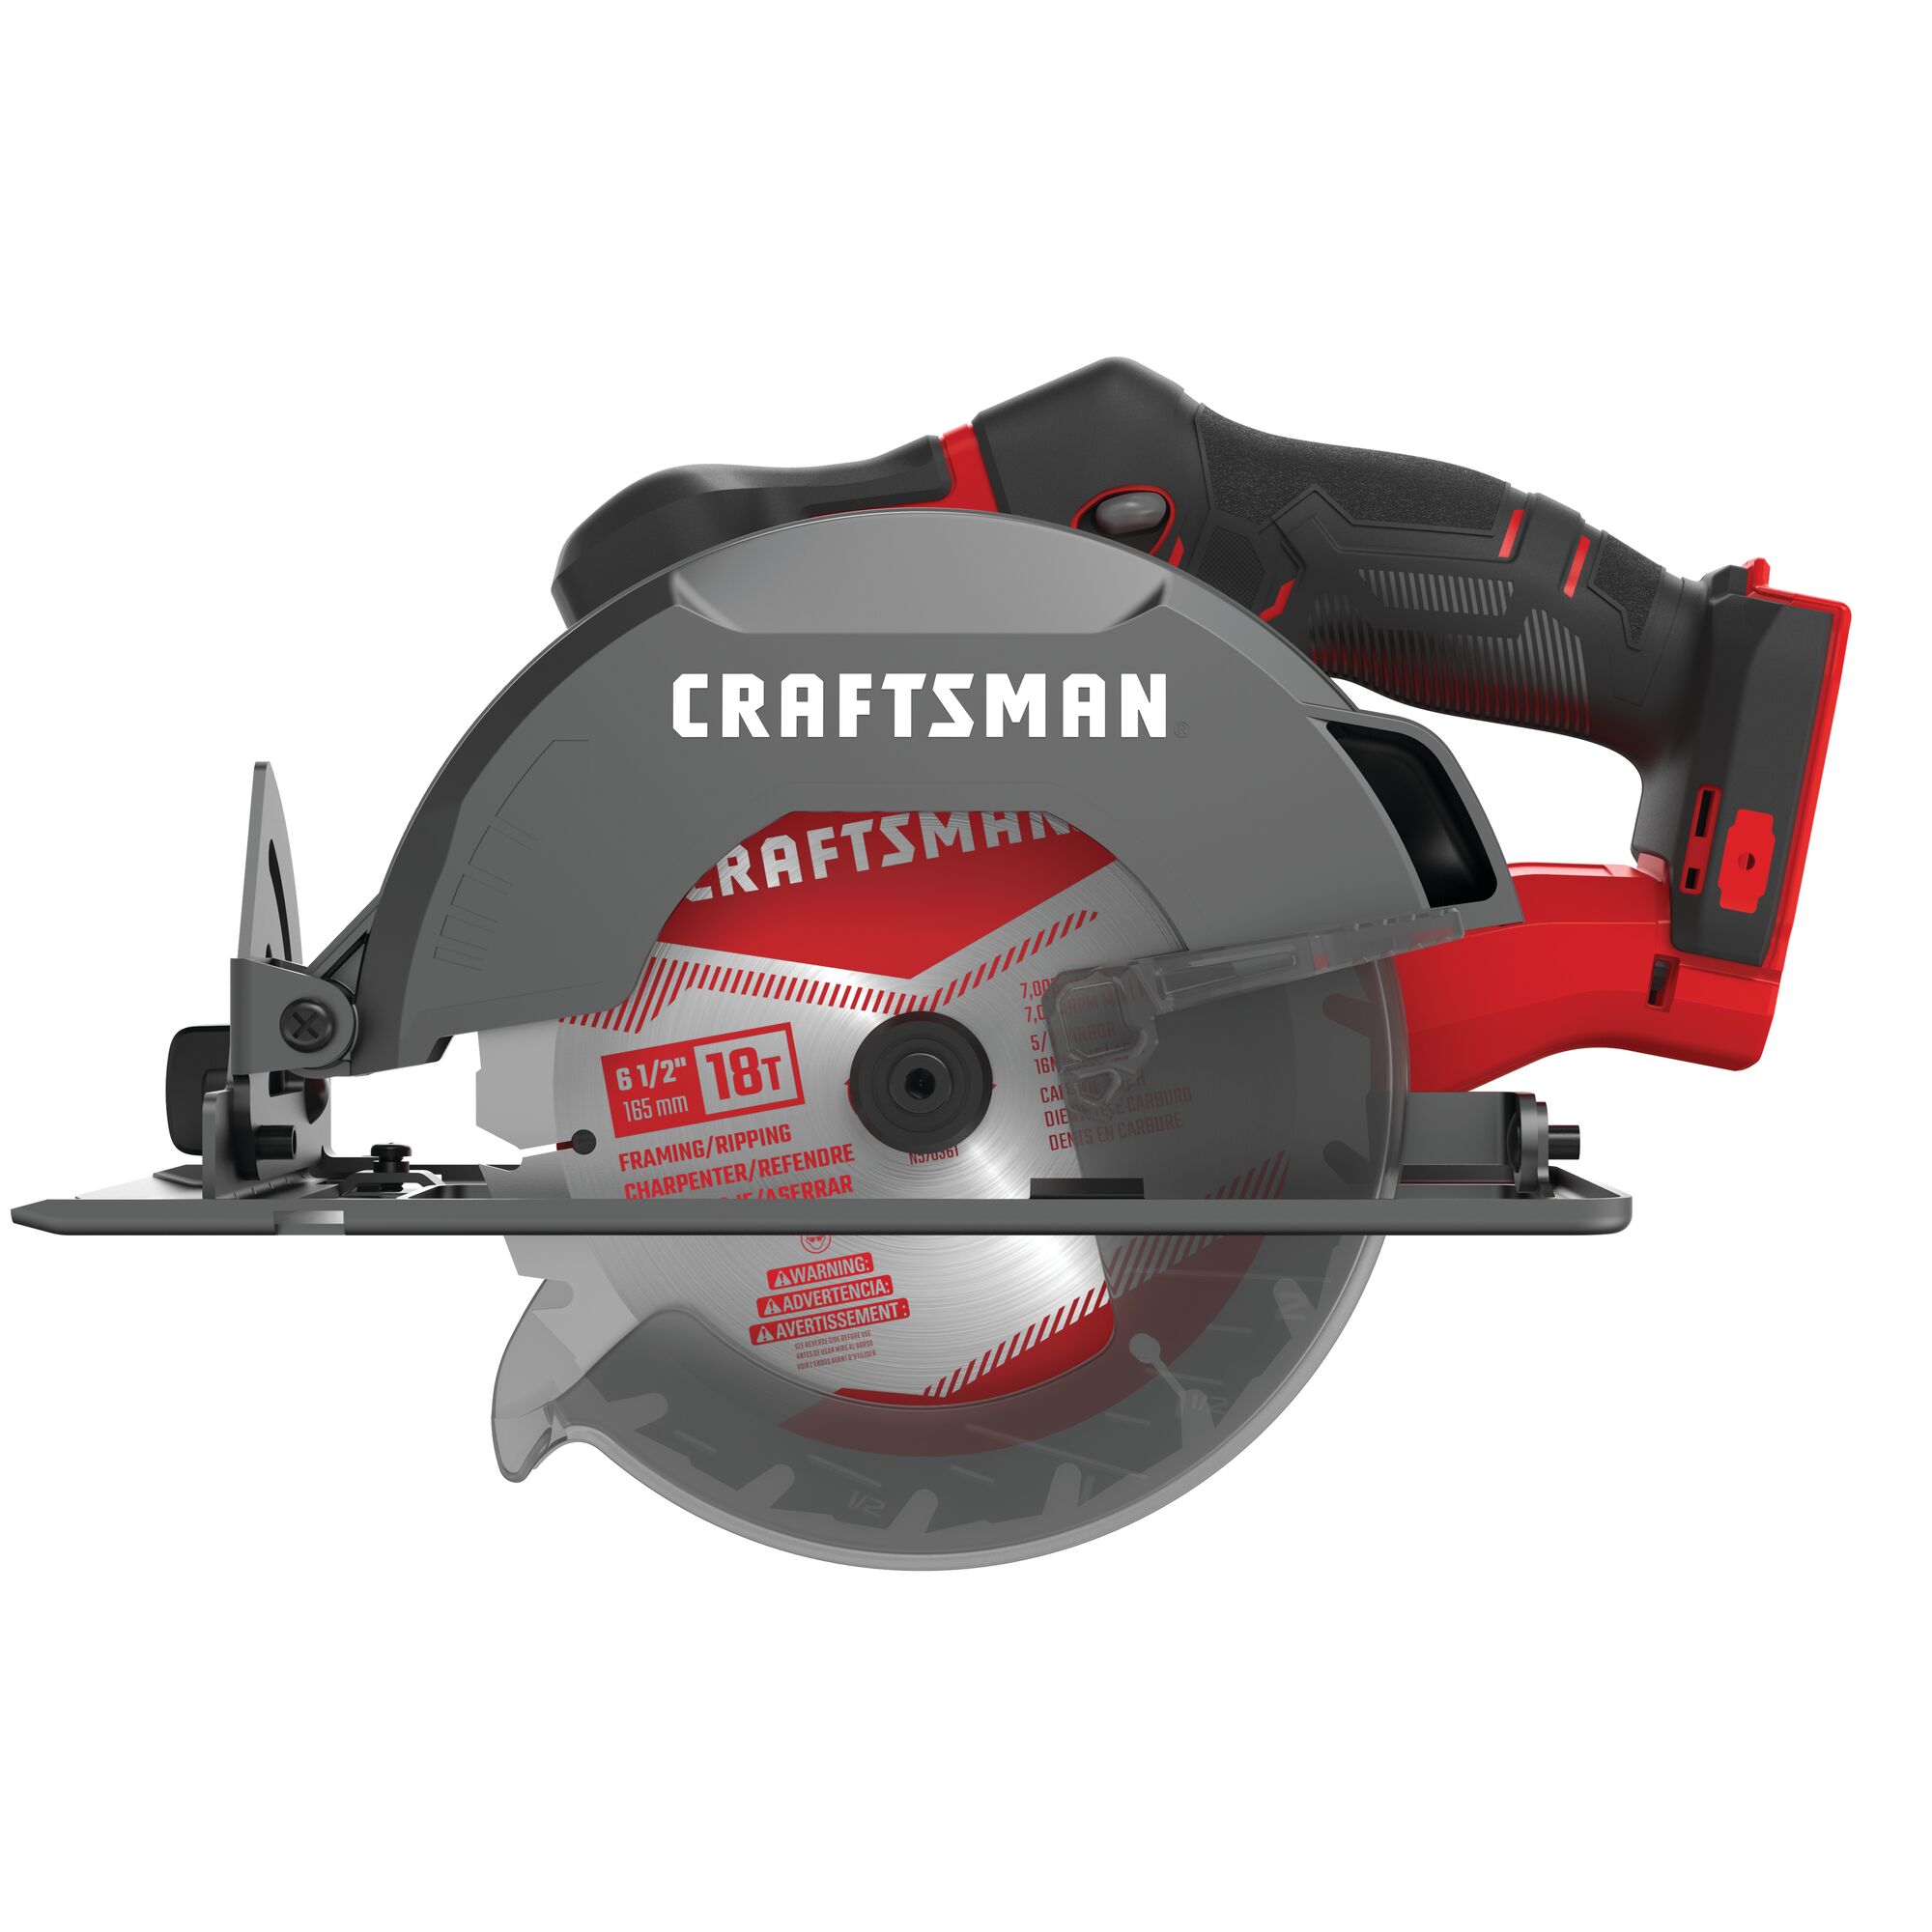 CMES500 & CMES300 13-Amp with Reciprocating Saw CRAFTSMAN 7-1/4-Inch Circular Saw 7.5-Amp 